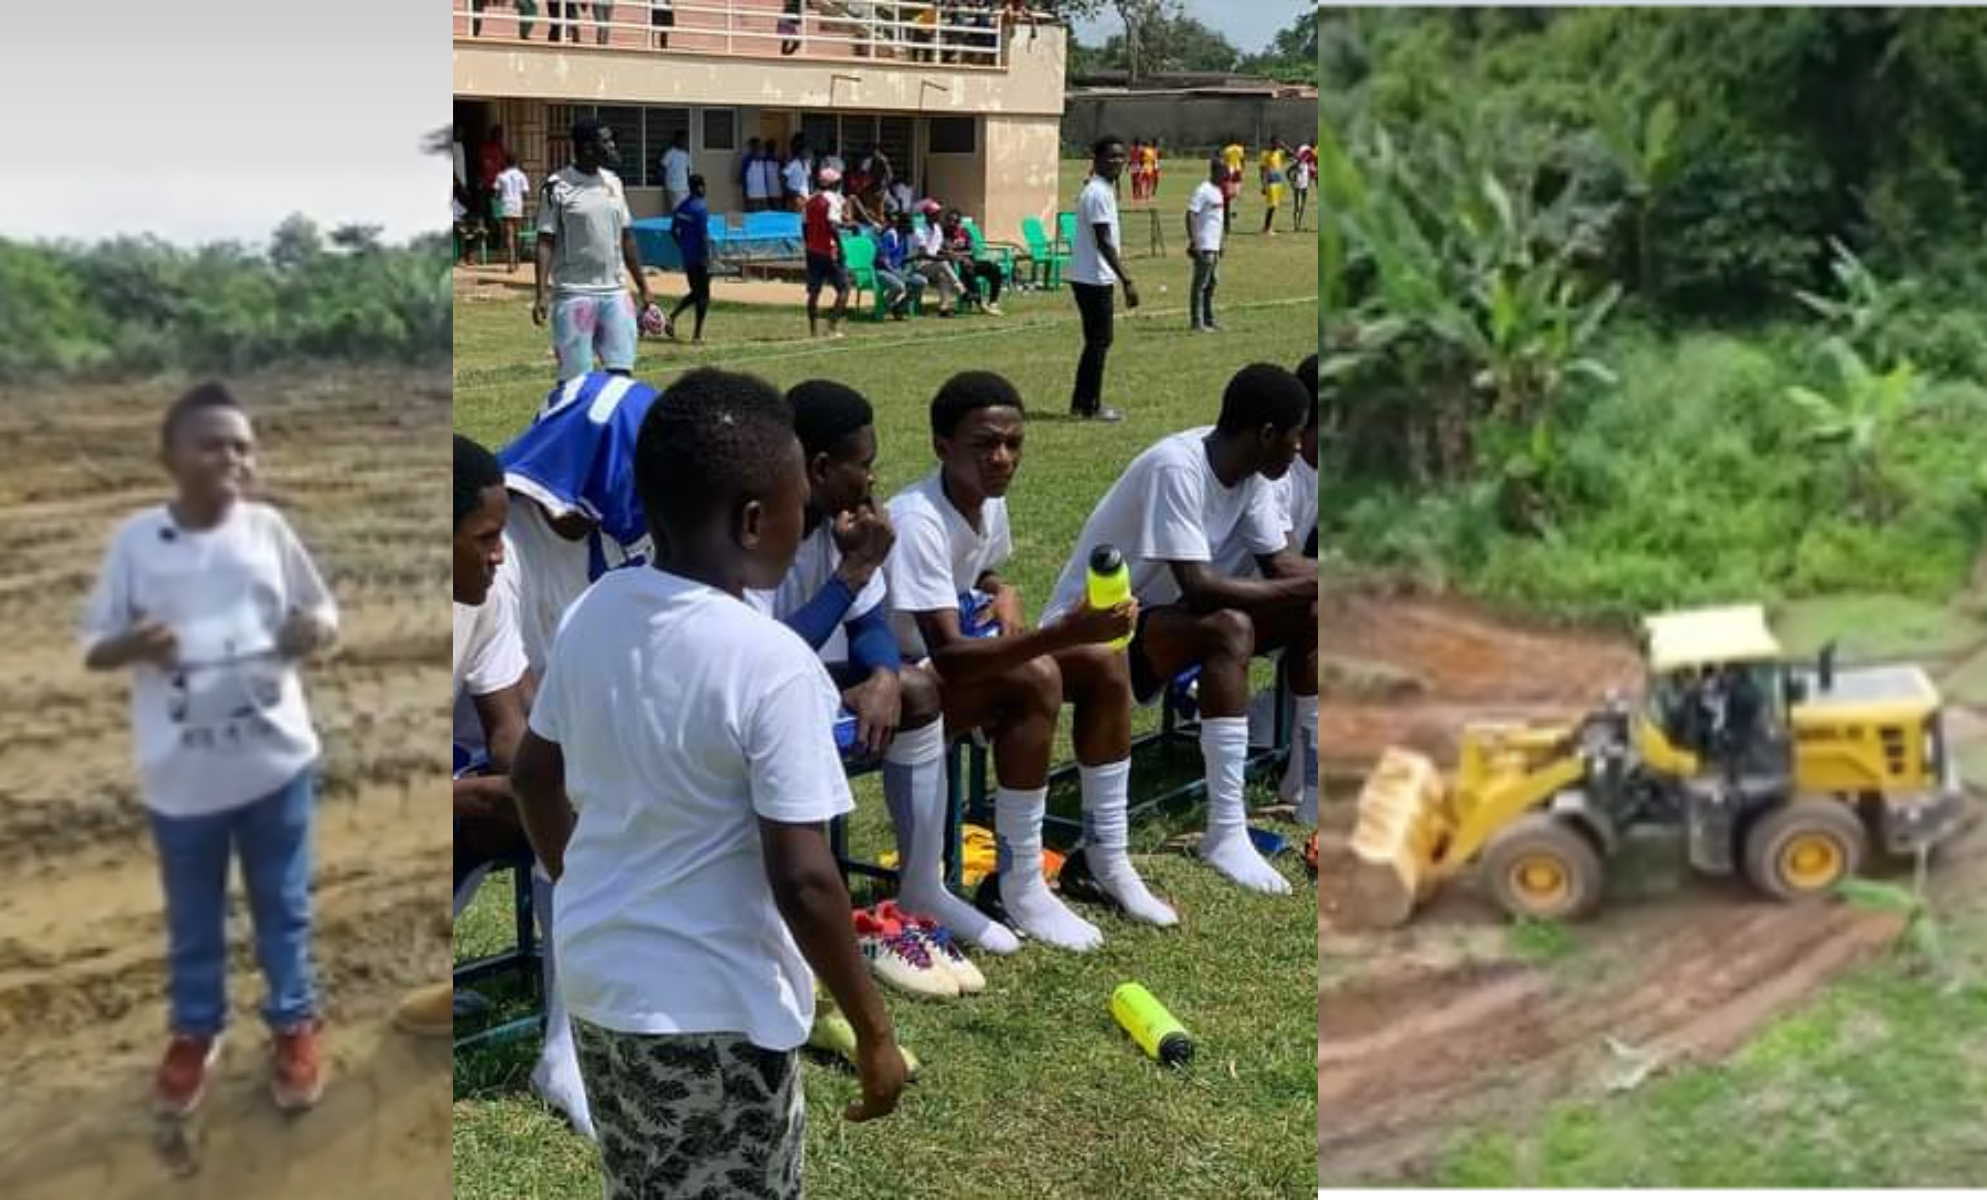 Yaw Dabo brings Arsenal scout to Ghana to monitor players of his soccer academy